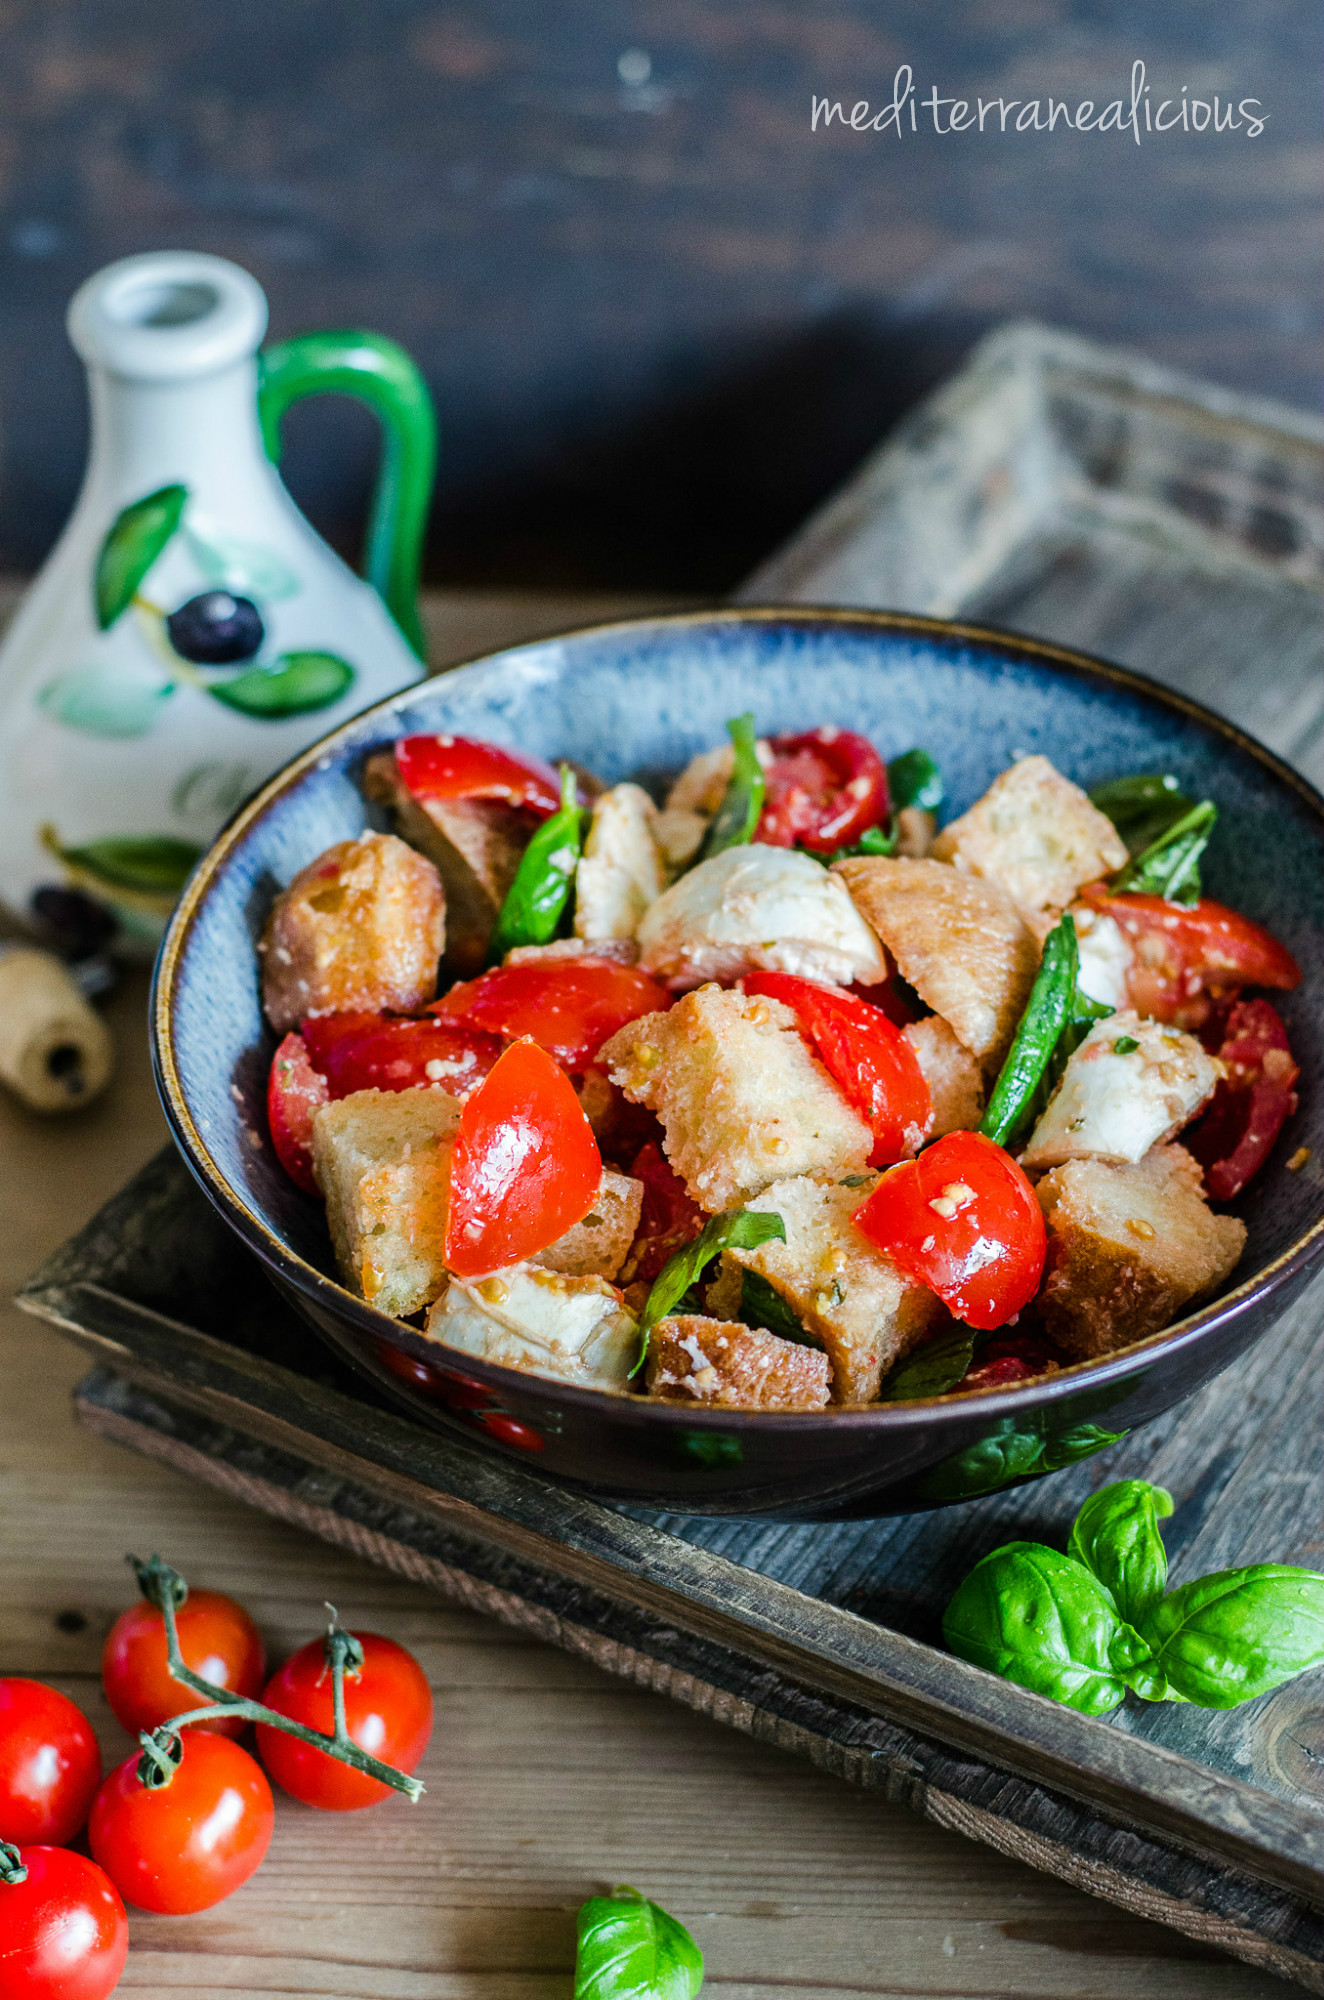 Panzanella – Tuscan Bread Salad a little different way